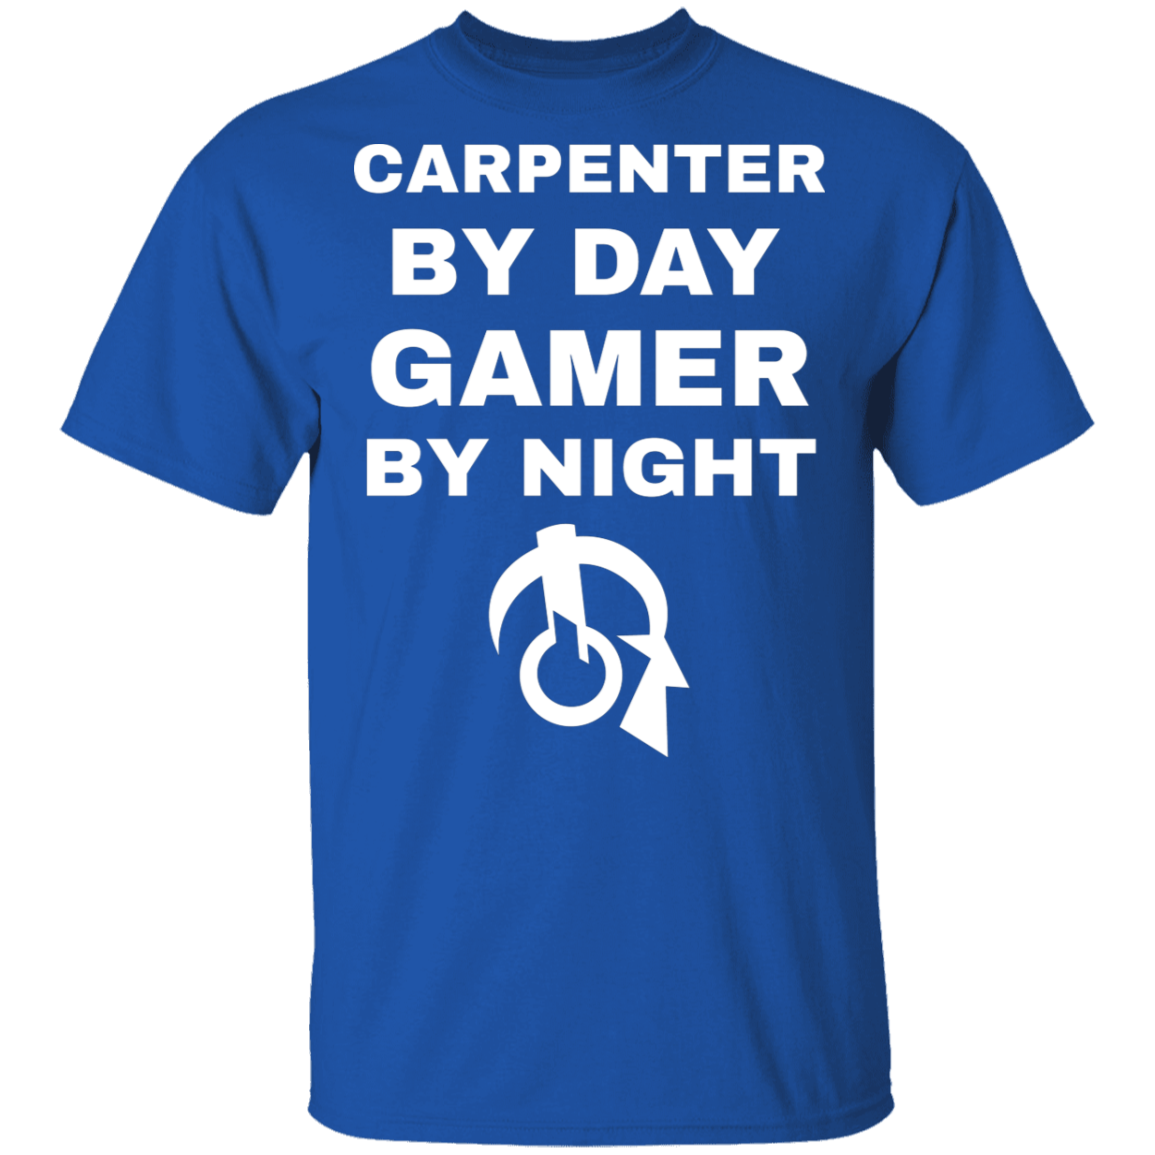 Carpenter By Day Gamer By Night T-Shirt